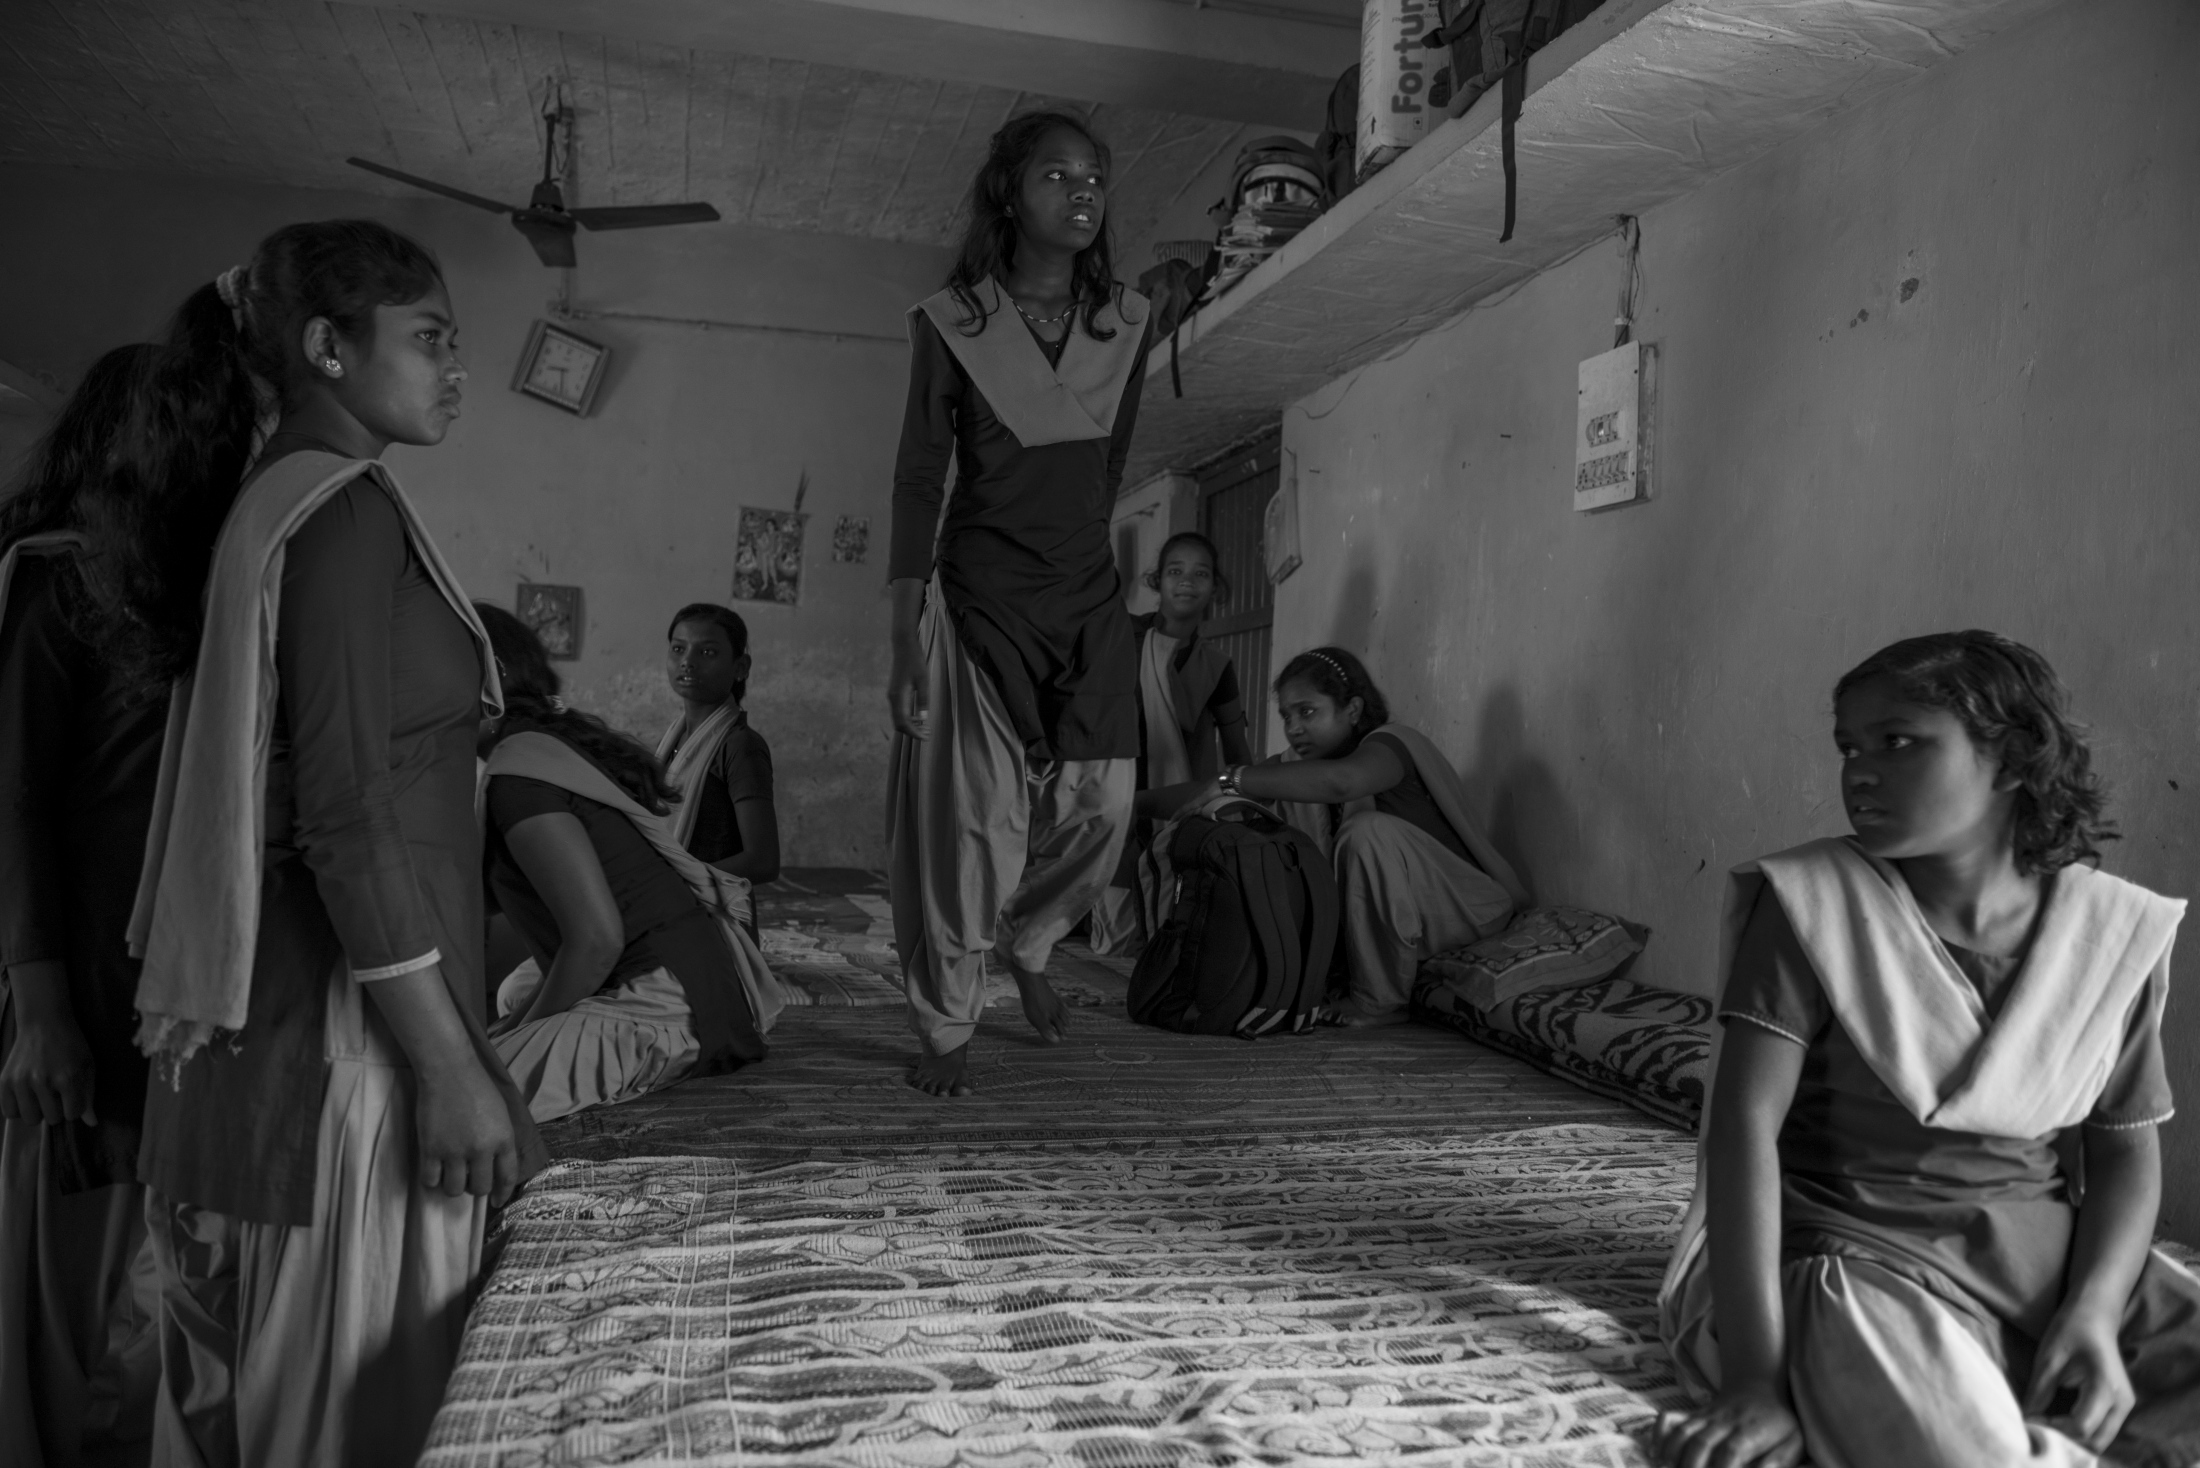 The Boarding School Saves Young Girls from Intergenerational Prostitution - Bihar, India - 